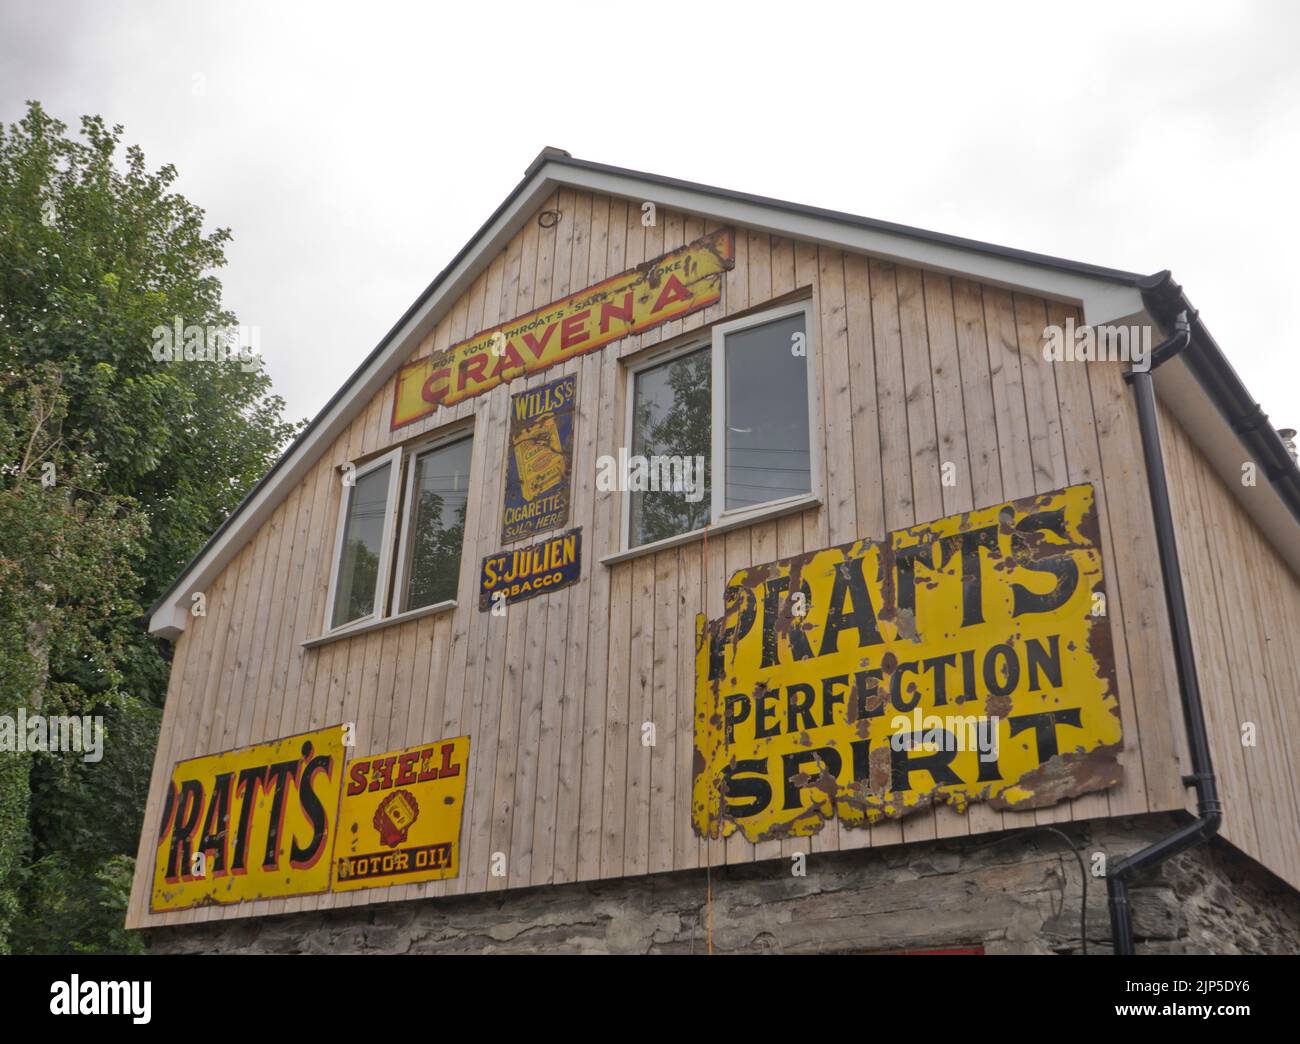 Vintage signs advertising oil and tobacco at a garage in Shrewsbury, Shropshire,England,UK Stock Photo